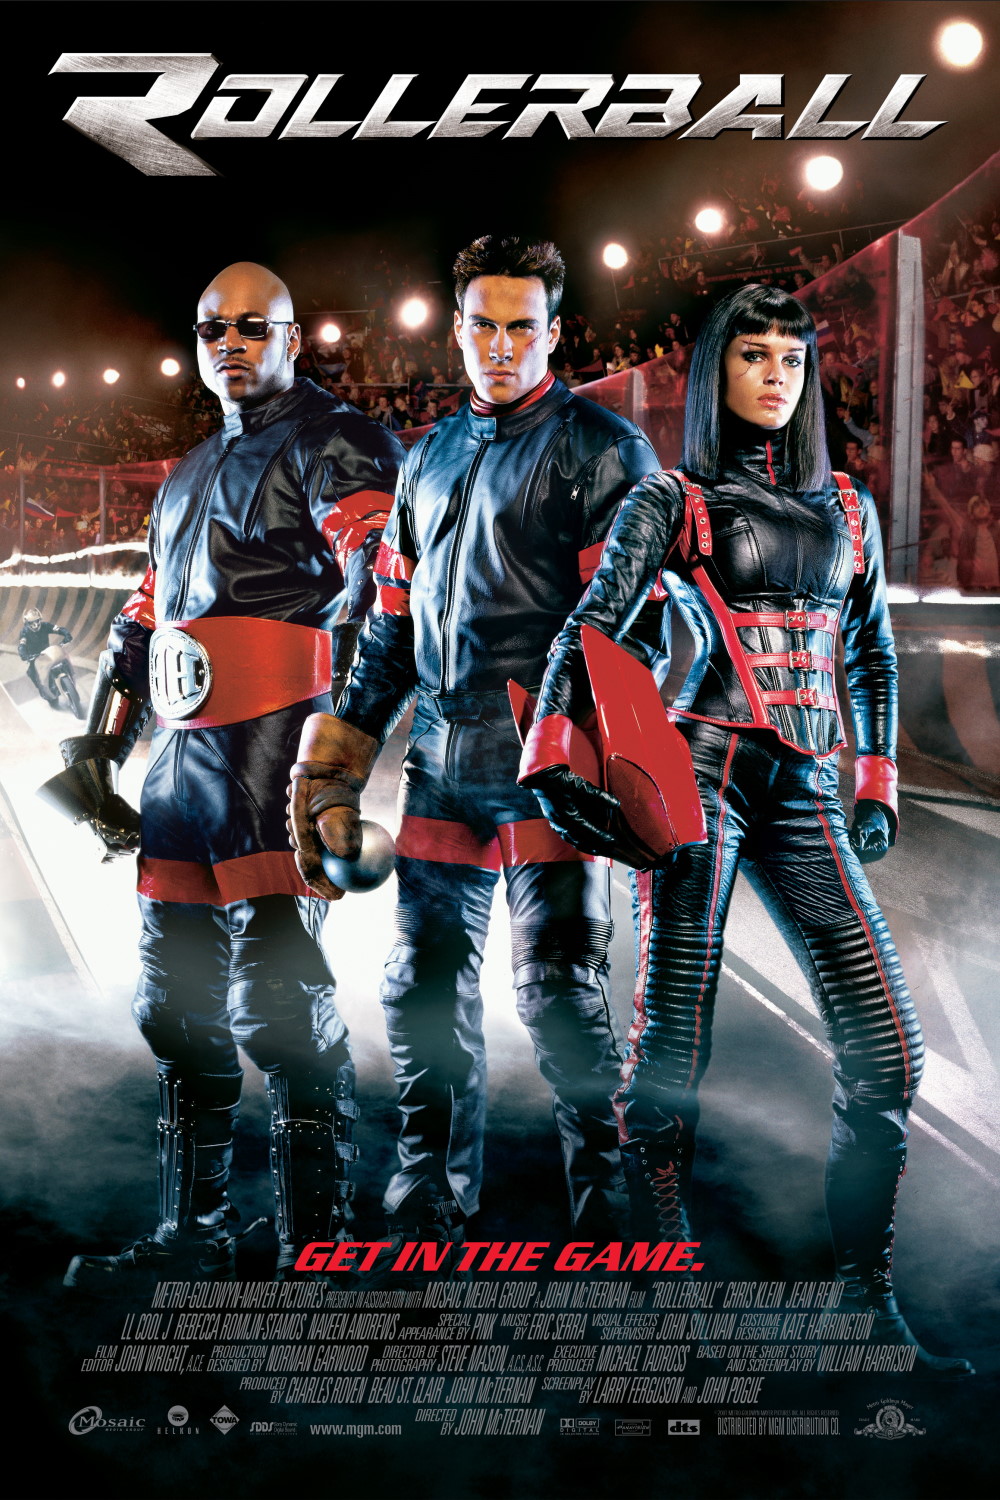 Rollerball (2002) Poster